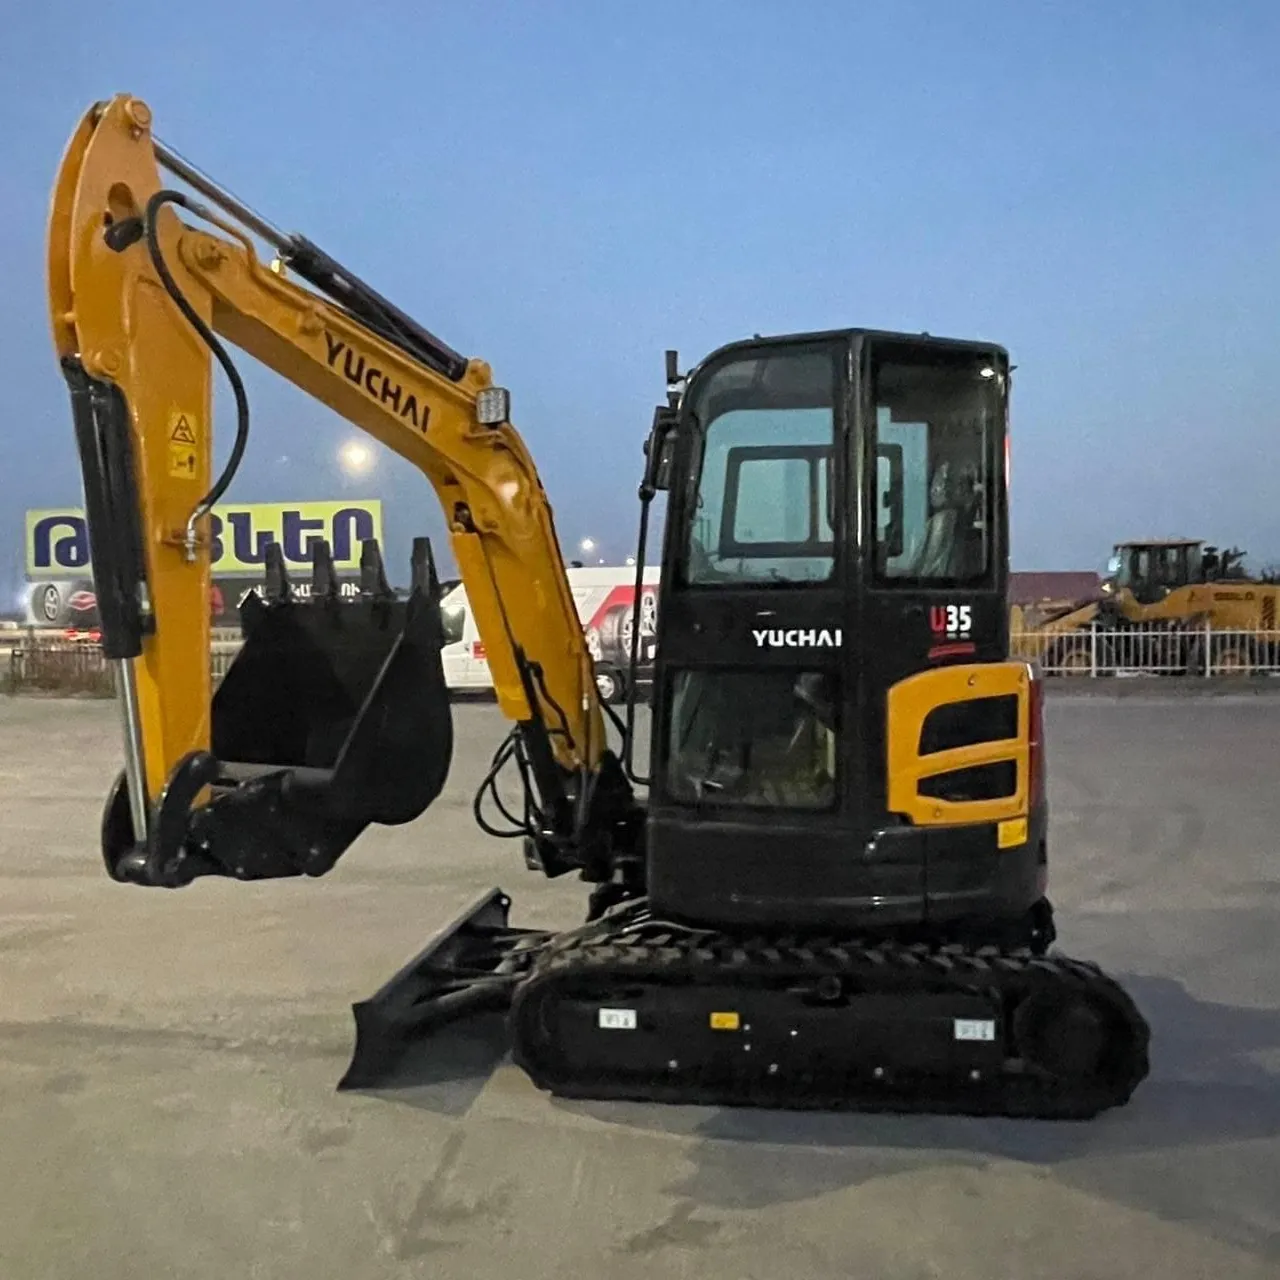 Bestselling Chinese Yuchai U35 Zero Tail mini excavator 3.5Ton Multifunctional Excavation Manufacturers Small Digger For Sale